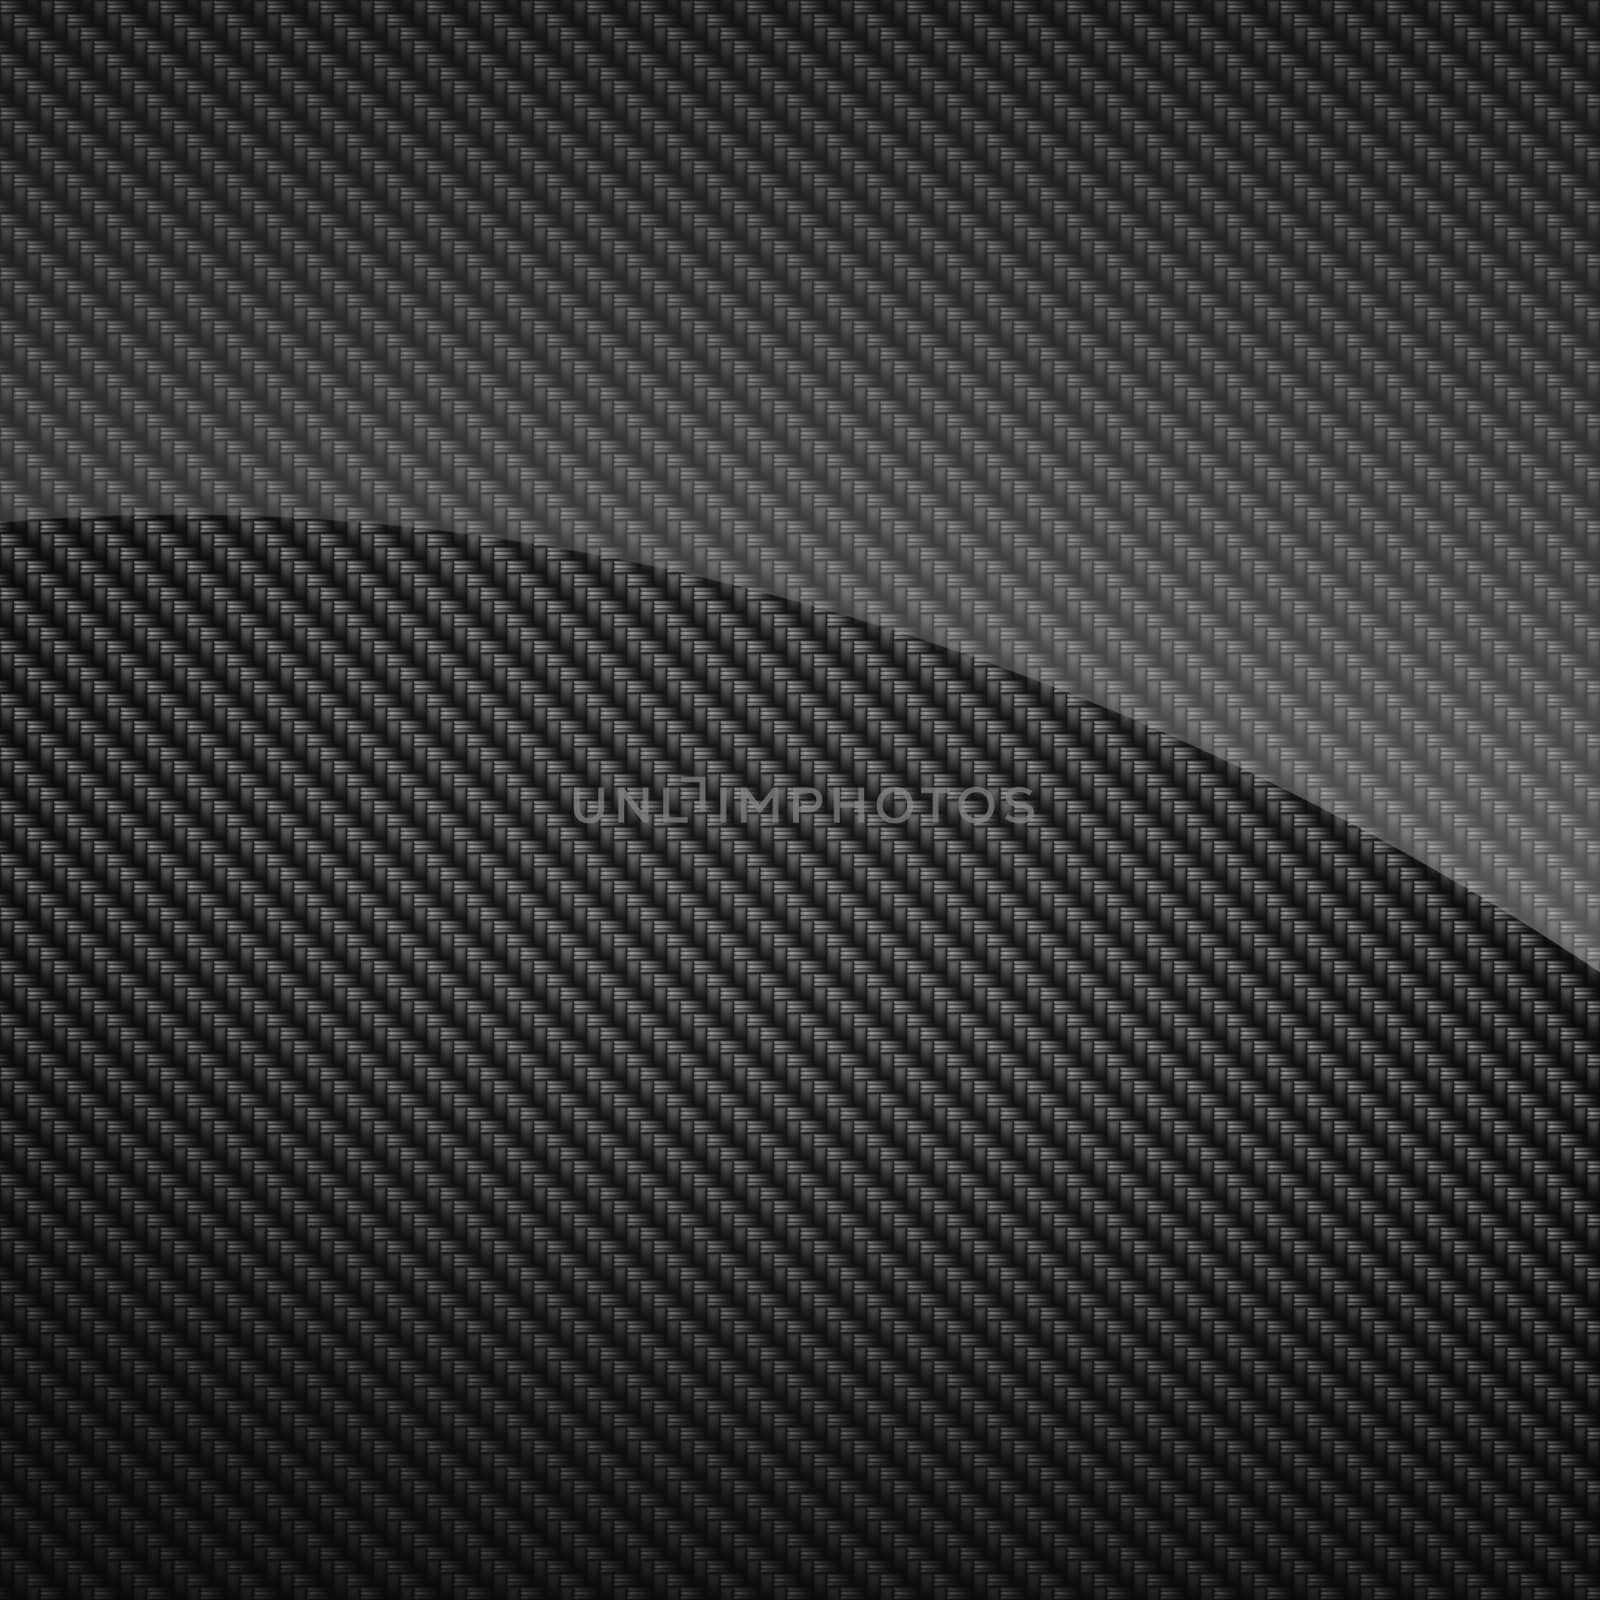 Black glossy carbon fiber background or texture